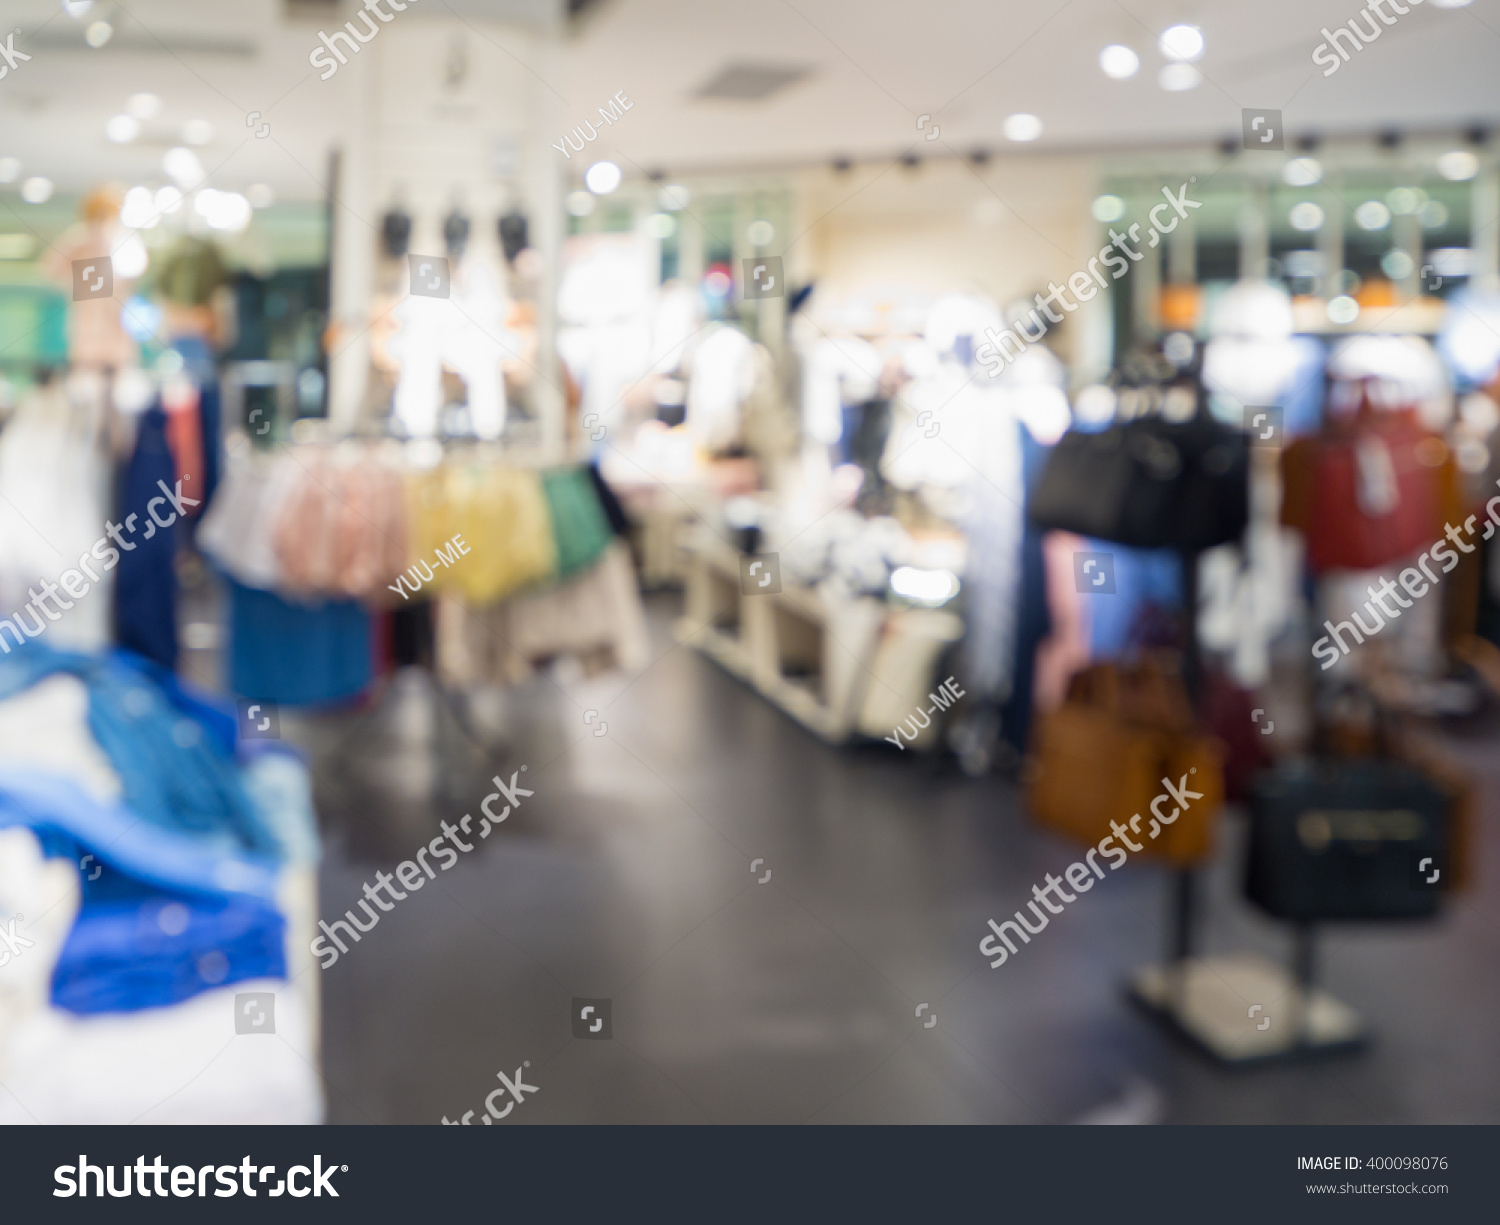 Abstract Blur Of Interior In Fashion Clothing Store Stock Photo ...